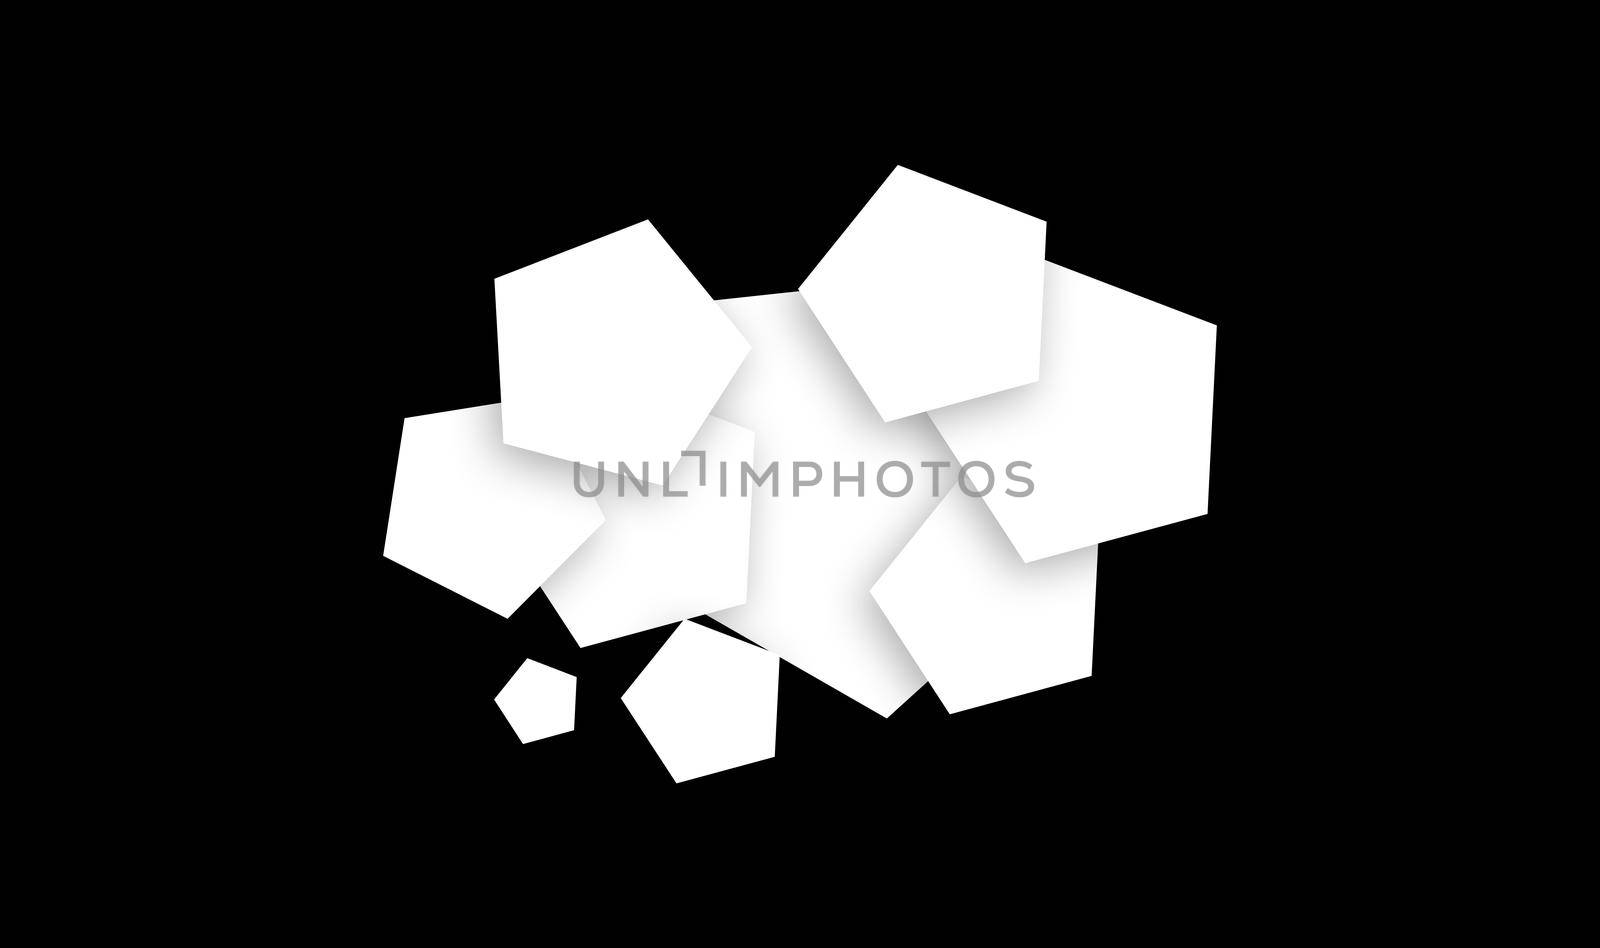 Pentagon shape cloud design soft shadow on black stock photo Black And White, Black Background, Abstract, At The Edge Of, Backgrounds by tabishere